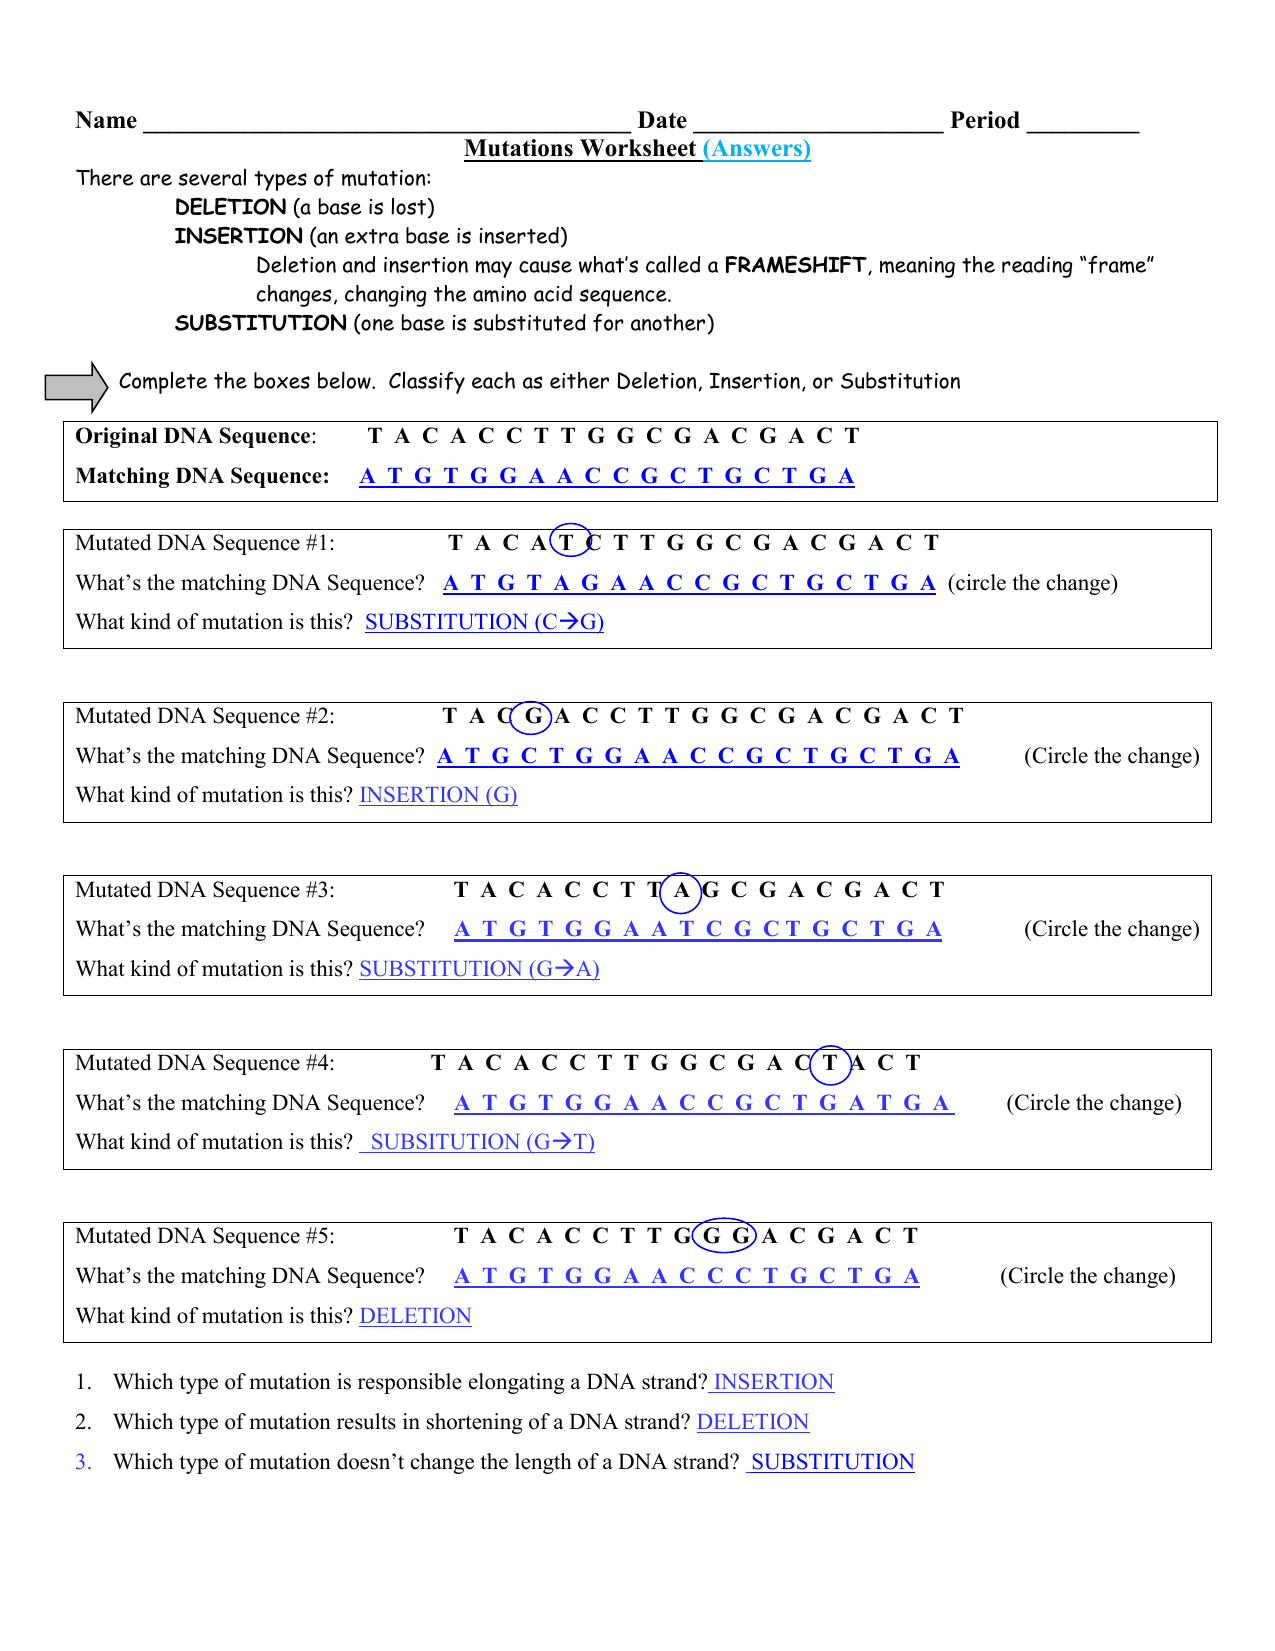 Sickle Cell Anemia Worksheet | excelguider.com